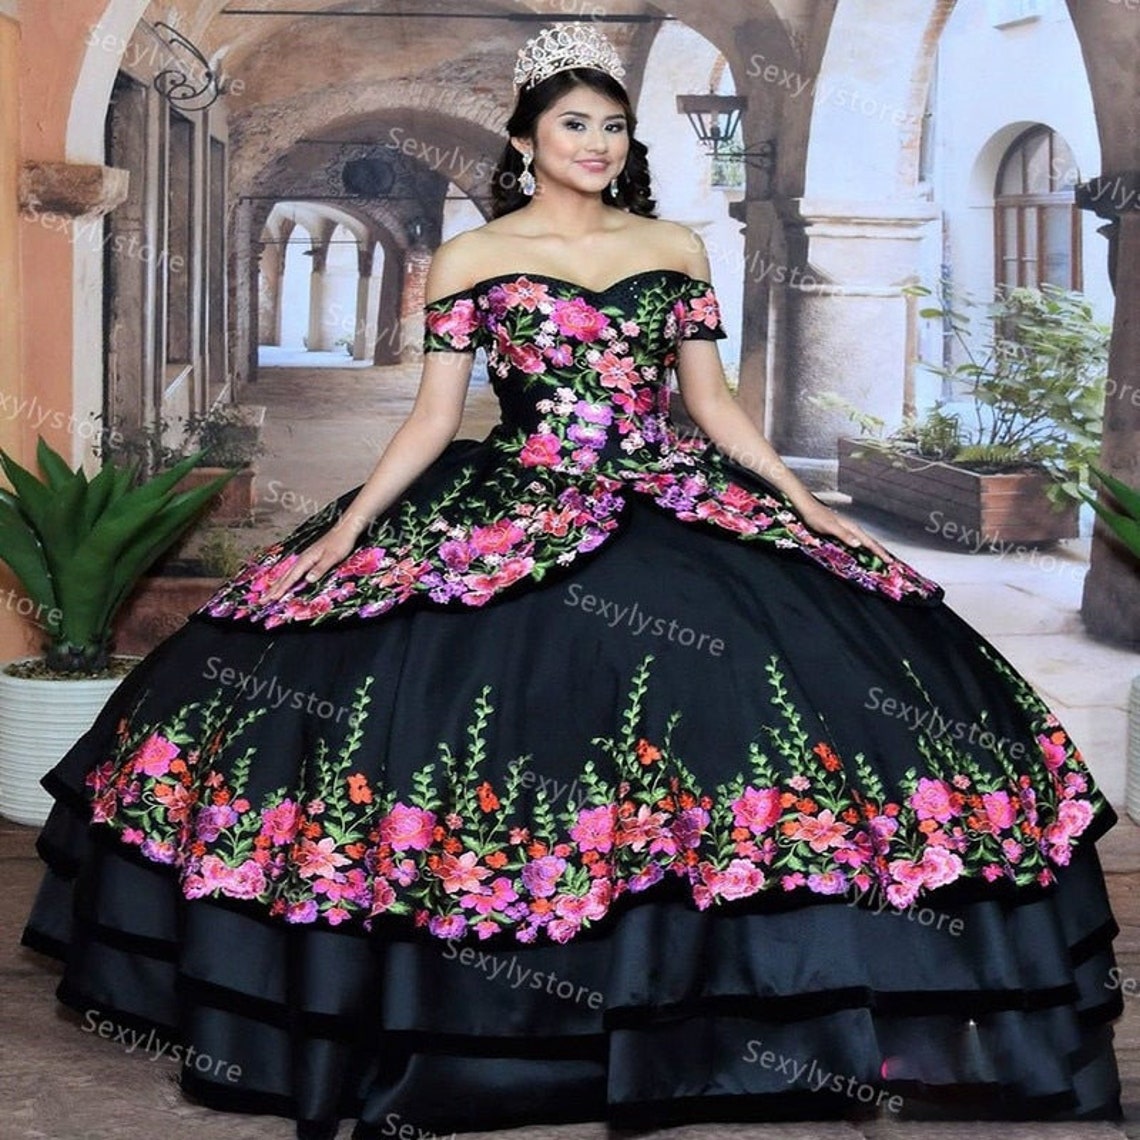 Princess Black Mexican Quinceanera Dresses 2020 With Short | Etsy